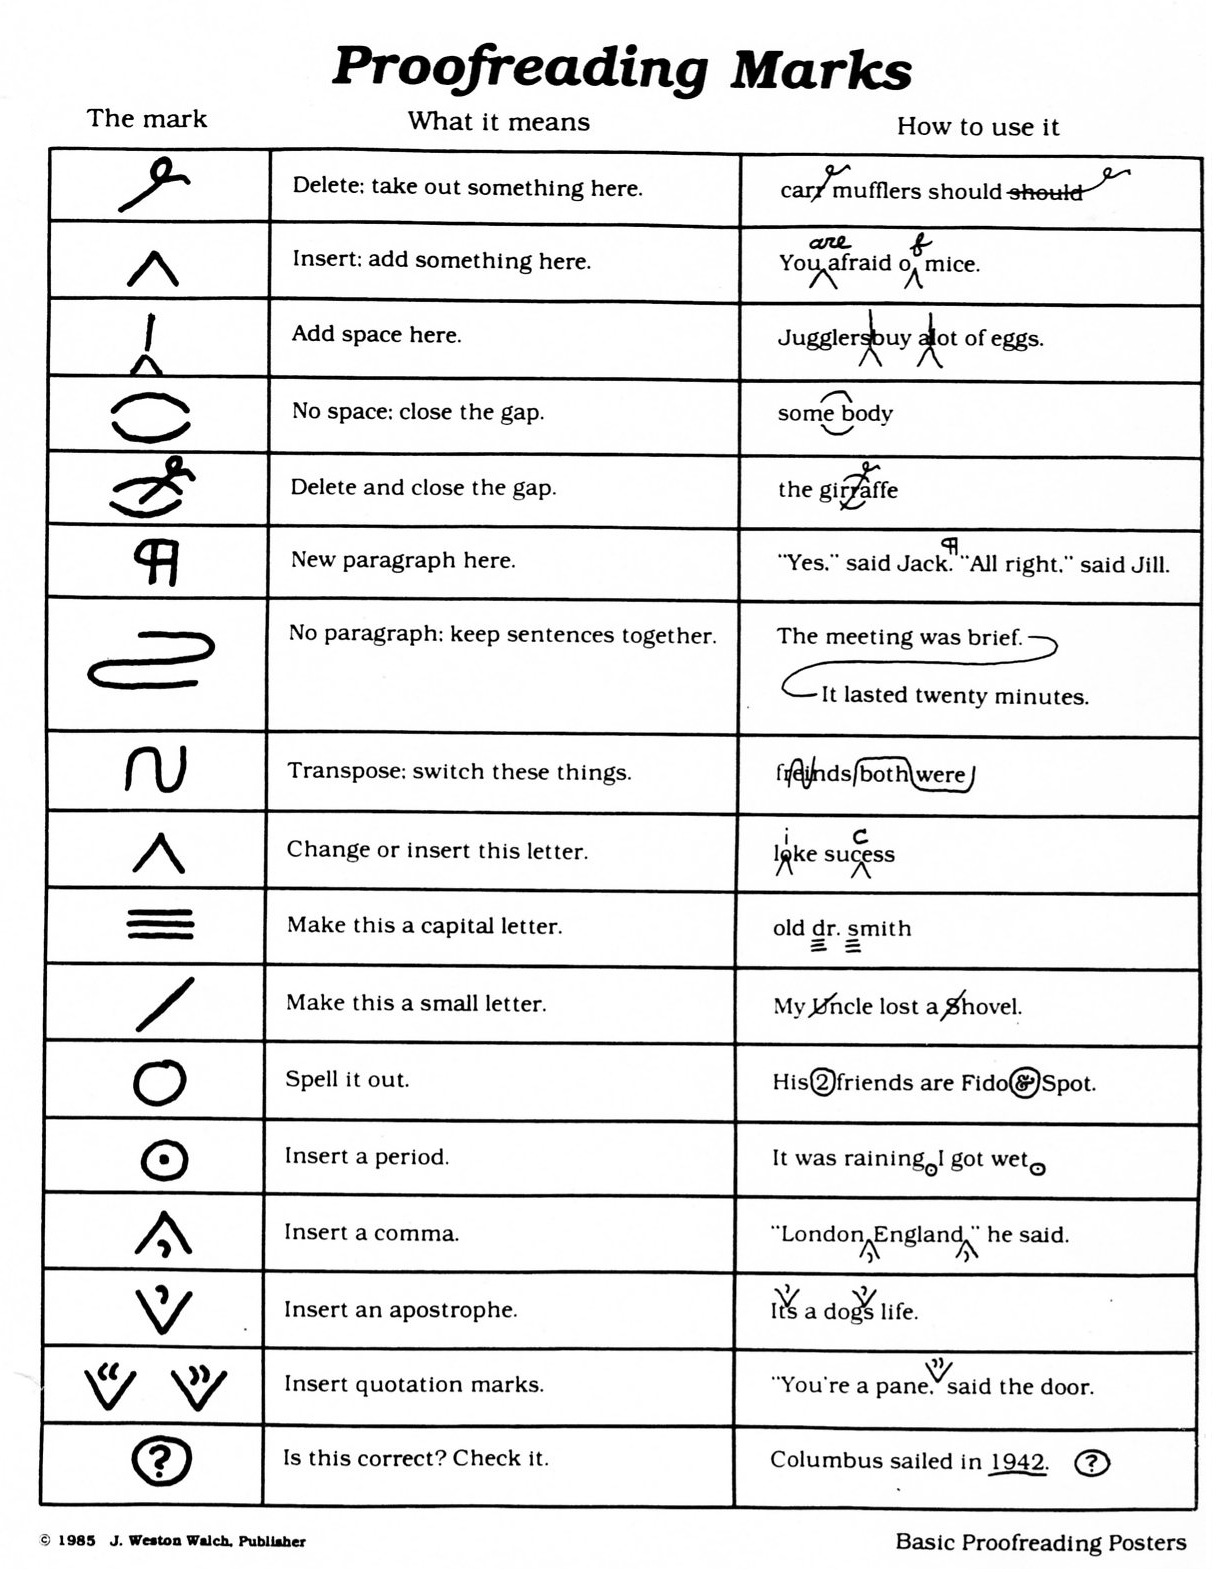 Proofreading Marks and Symbols